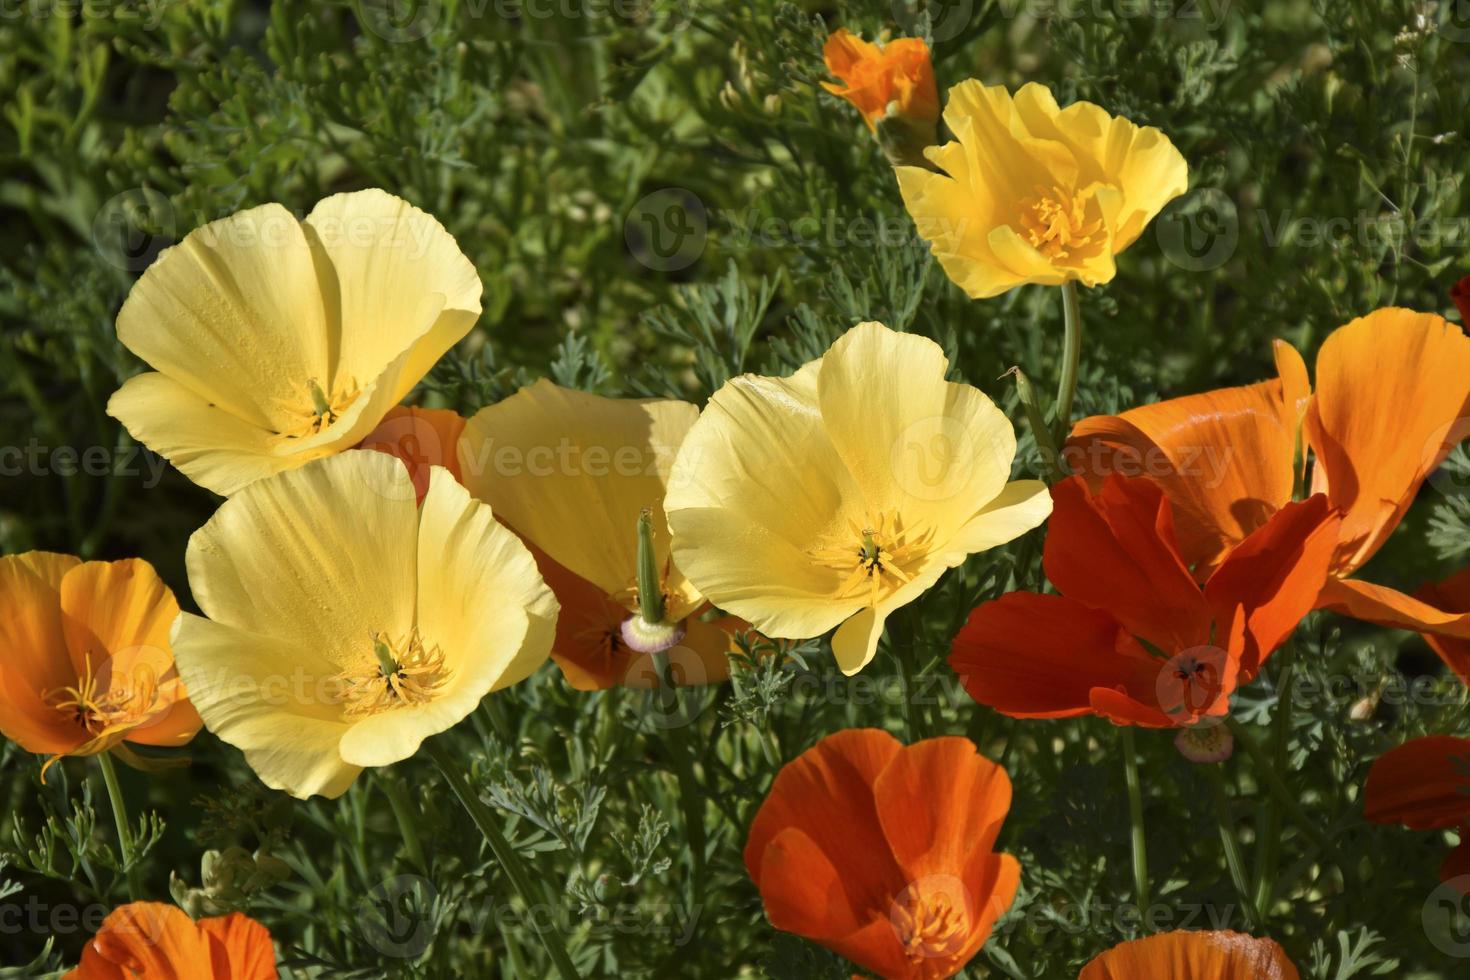 Delicate yellow flowers of the Ashsholtsia of the Poppy family Papaveraceae close-up in the garden photo